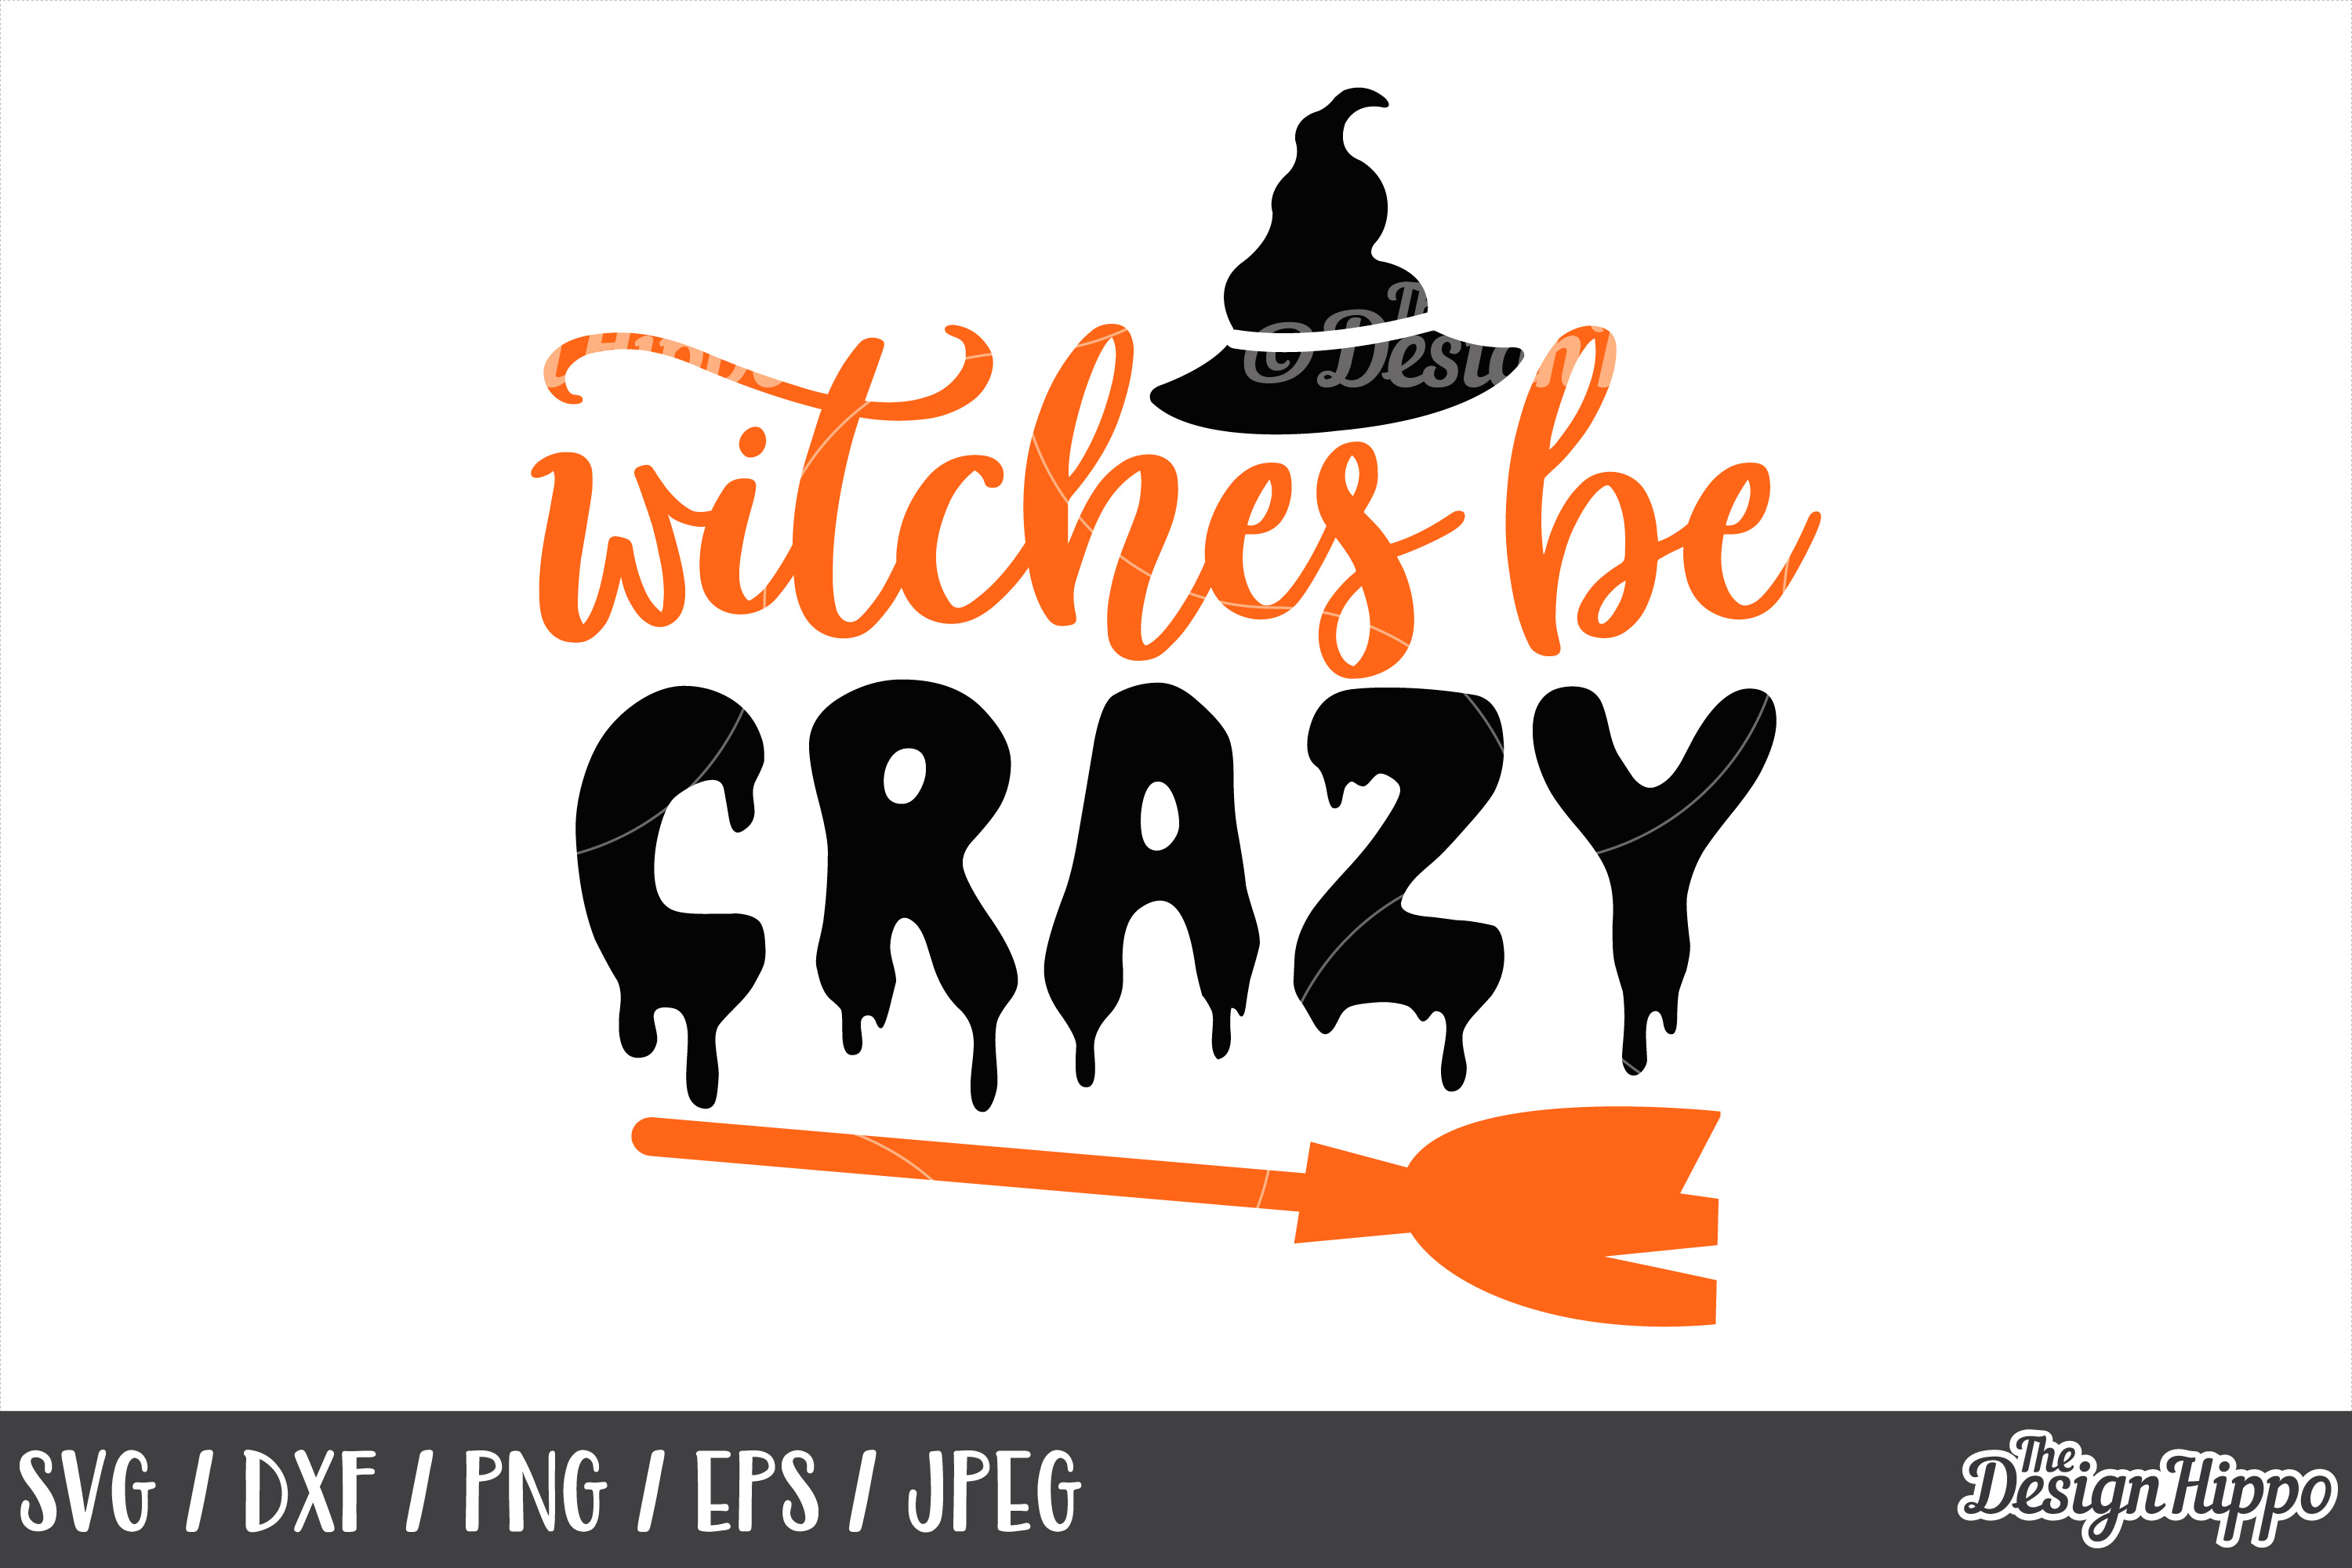 Download Witches be crazy SVG, Halloween, Witch hat, Broom, SVG, PNG